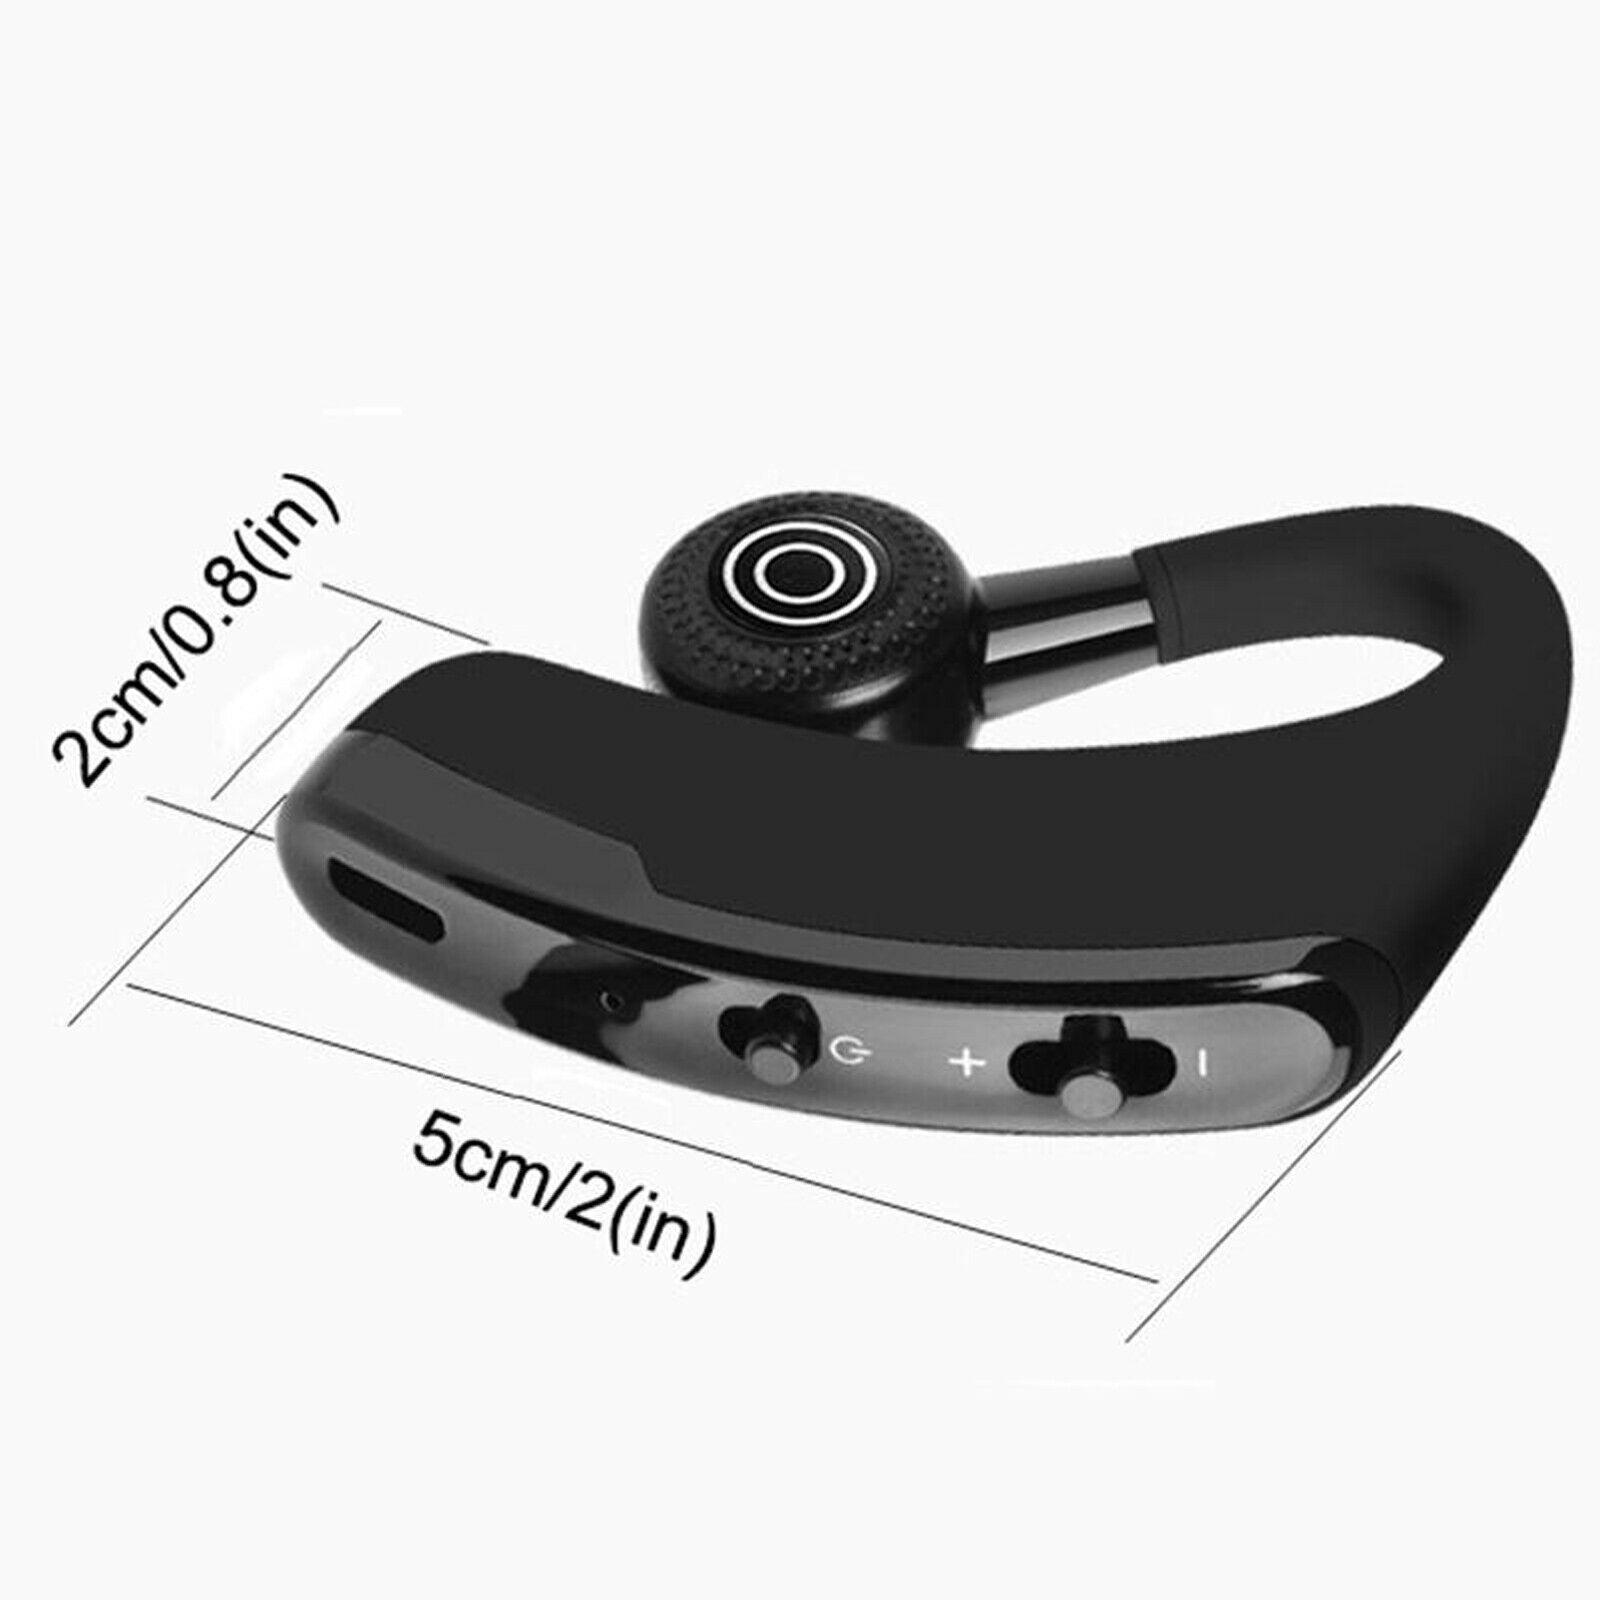 Wireless Bluetooth Headset with Microphone for Cell Phone Driving Office PC